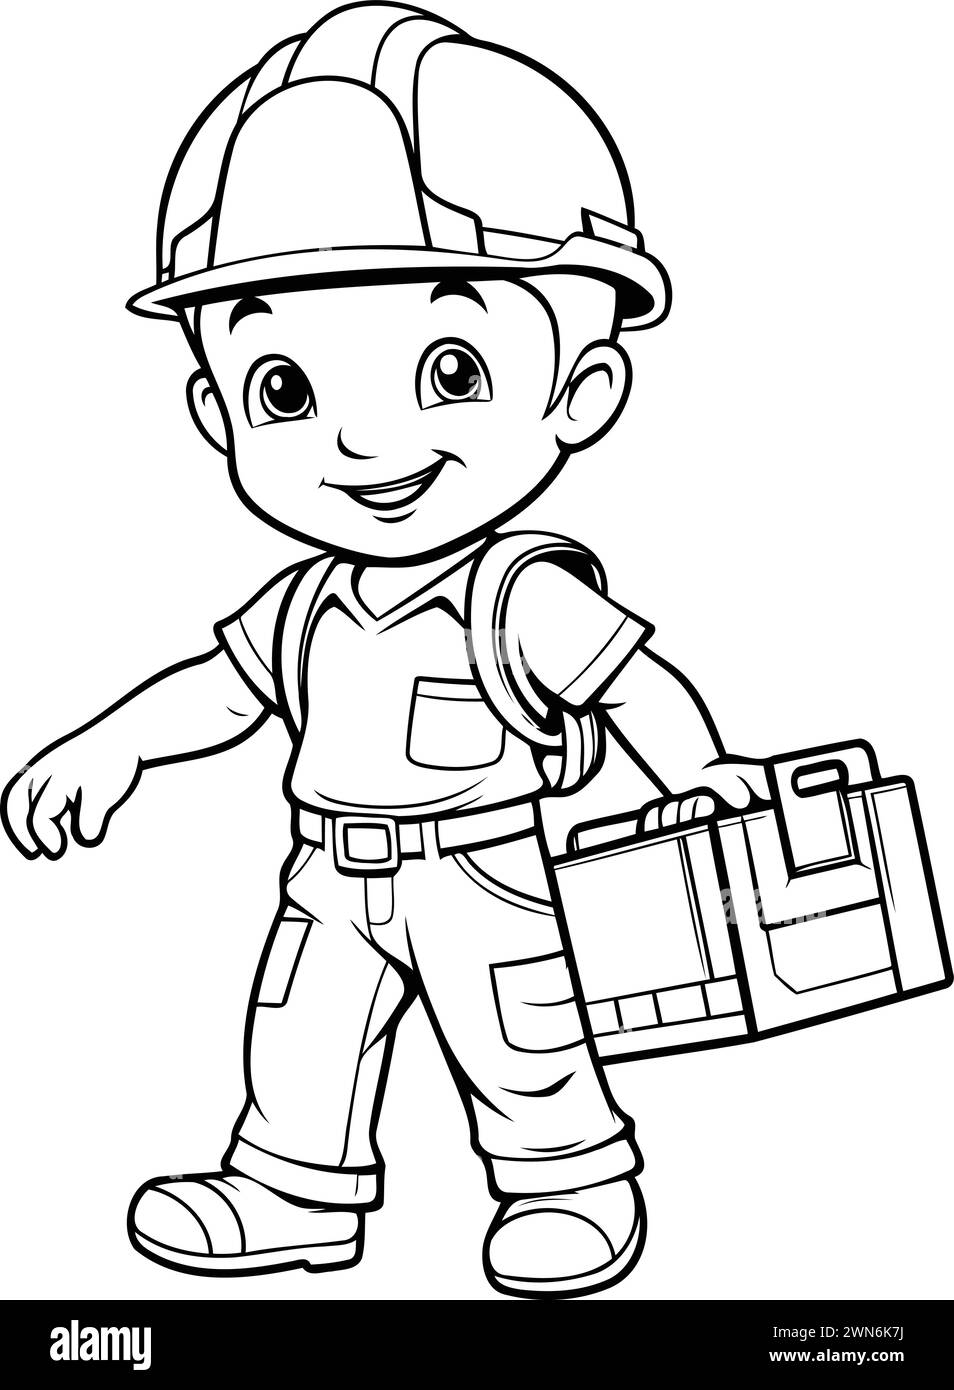 Illustration of a Little Boy Wearing a Hard Hat and Holding a Briefcase Stock Vector